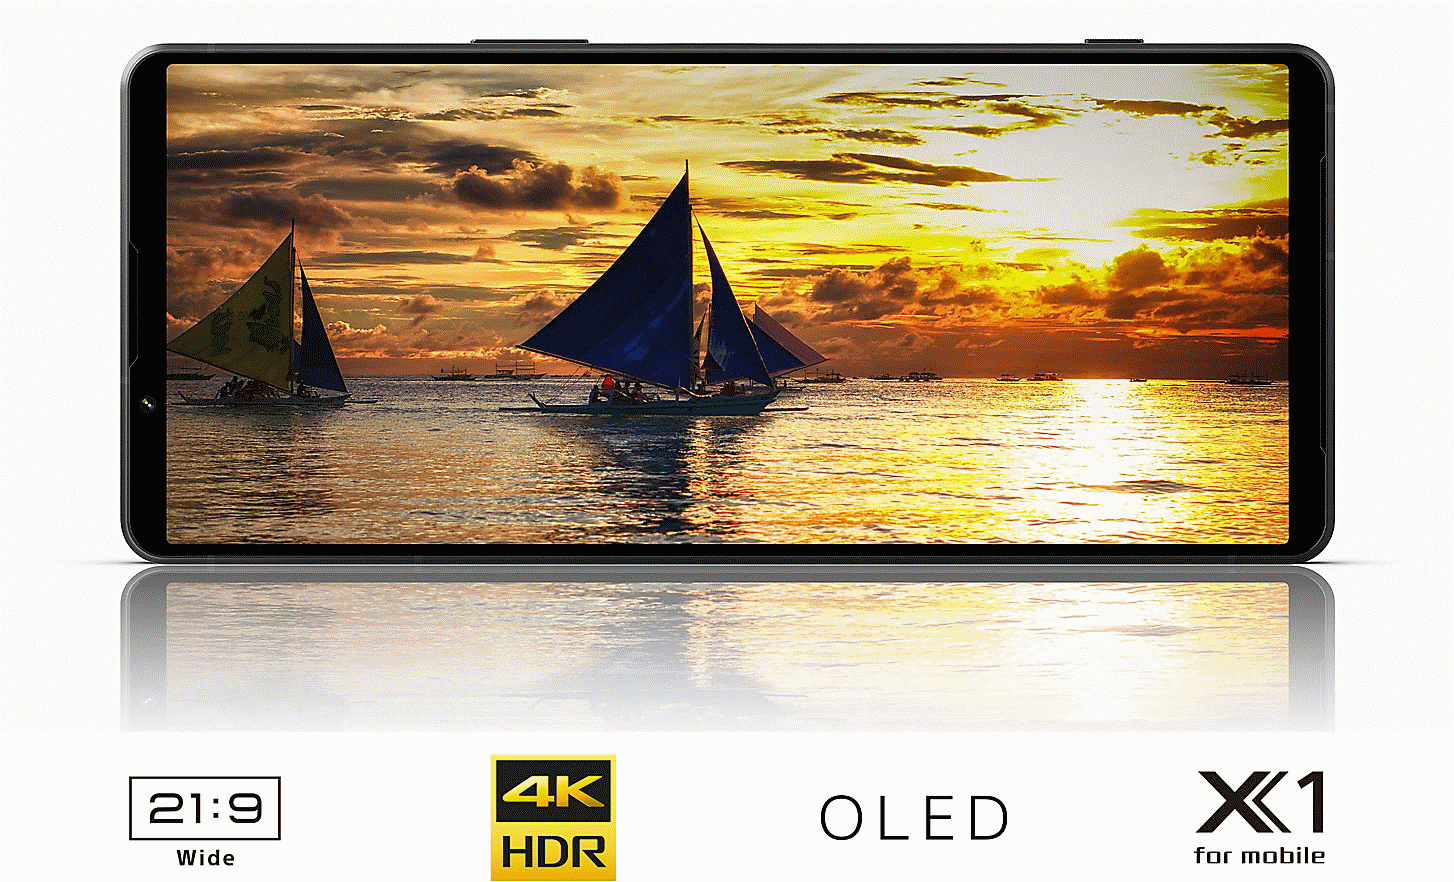 An Xperia 1V displaying a sailing boat at sunset and under it the logos for 21:9 Wide, 4K HDR, OLED, X1 for mobile